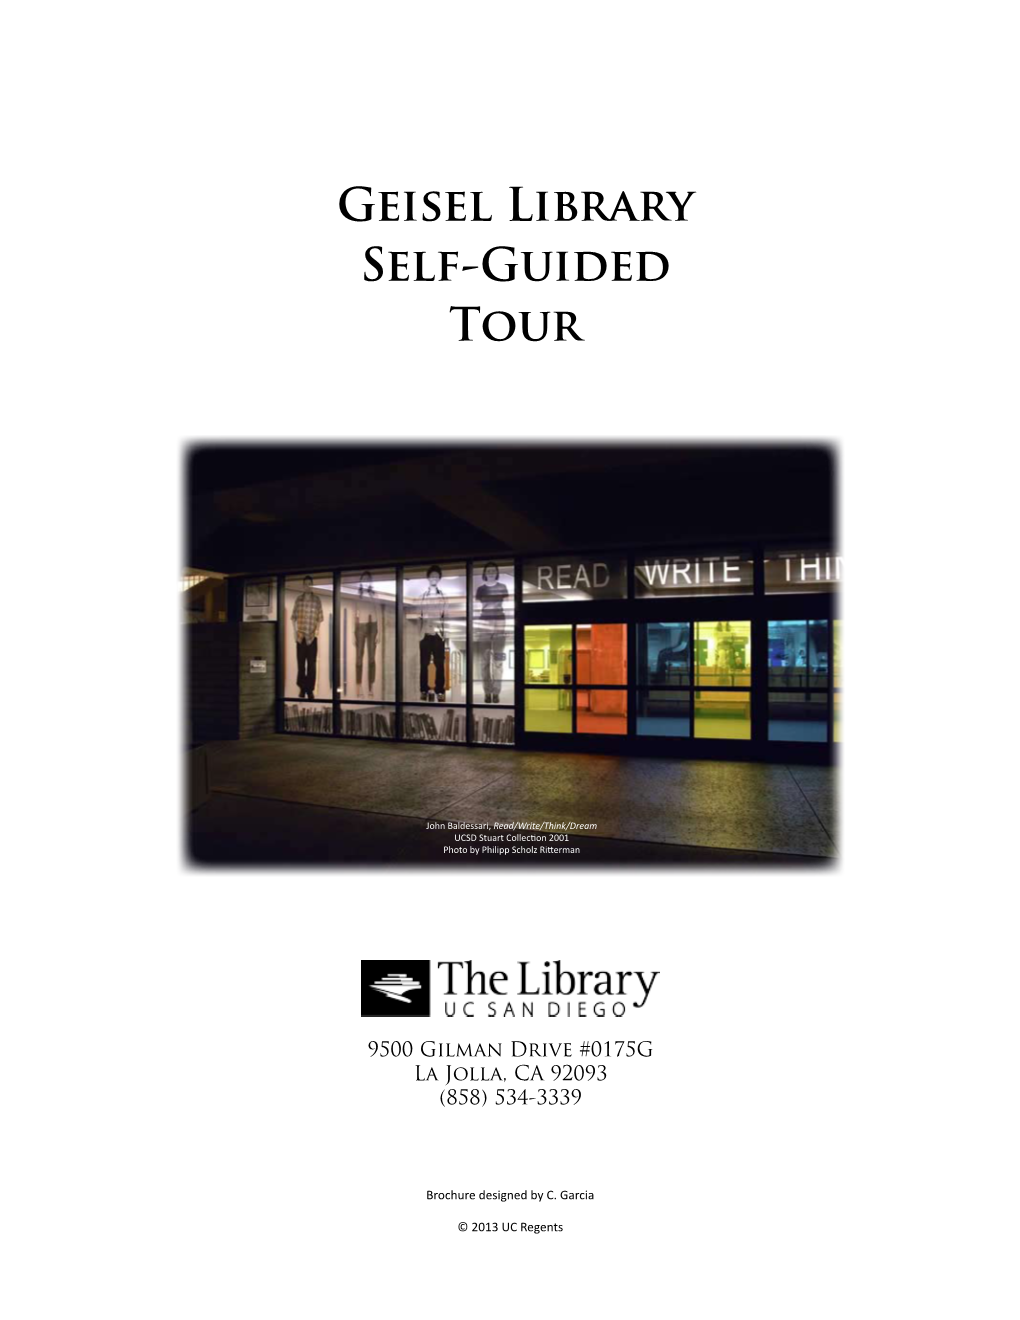 Geisel Library Self-Guided Tour